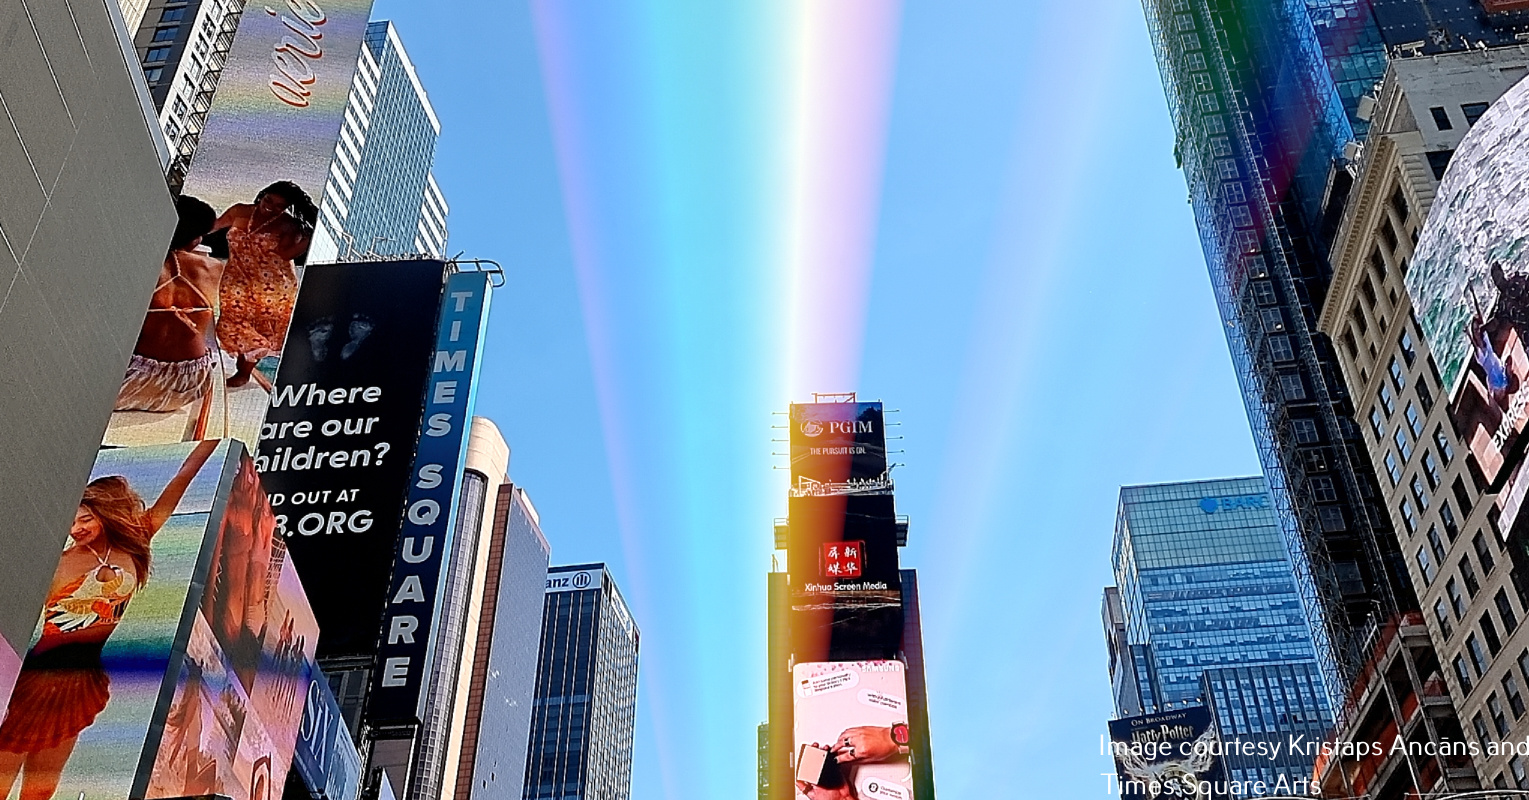 A rainbow made of light is visible in the sky over Times Square